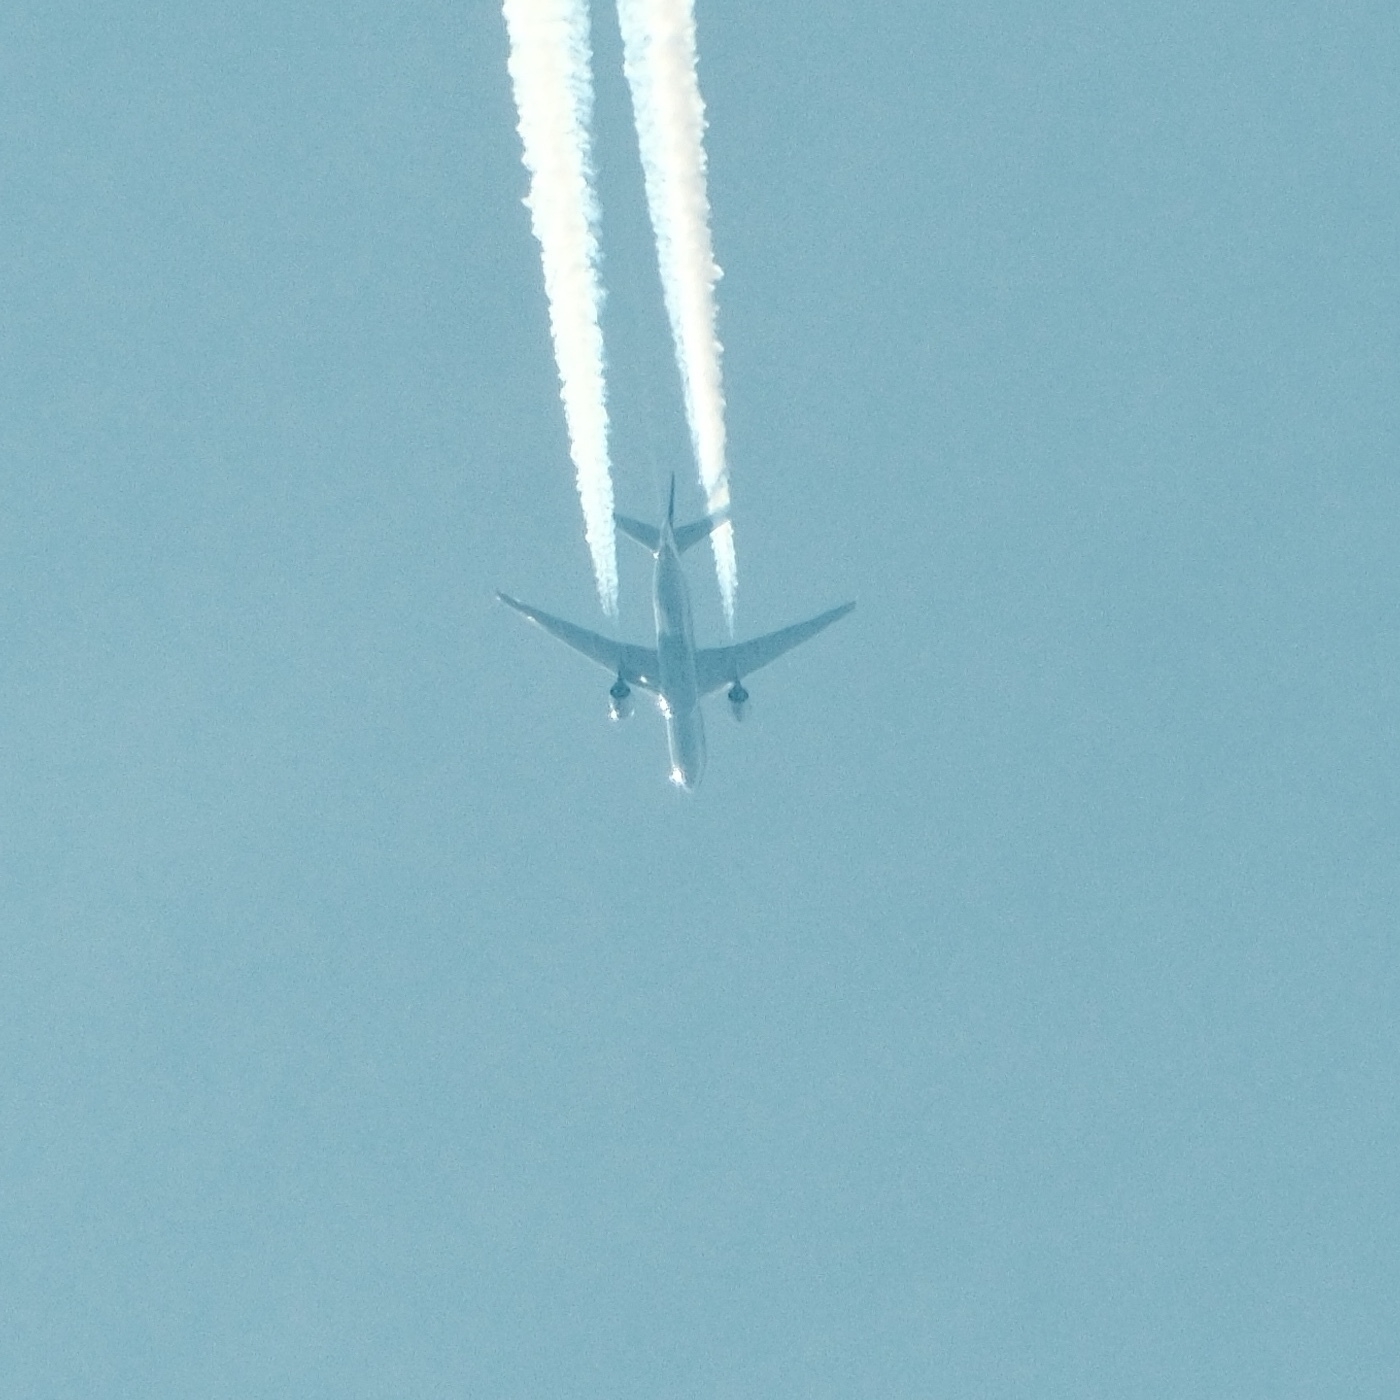 United 777-200 flyover with contrails